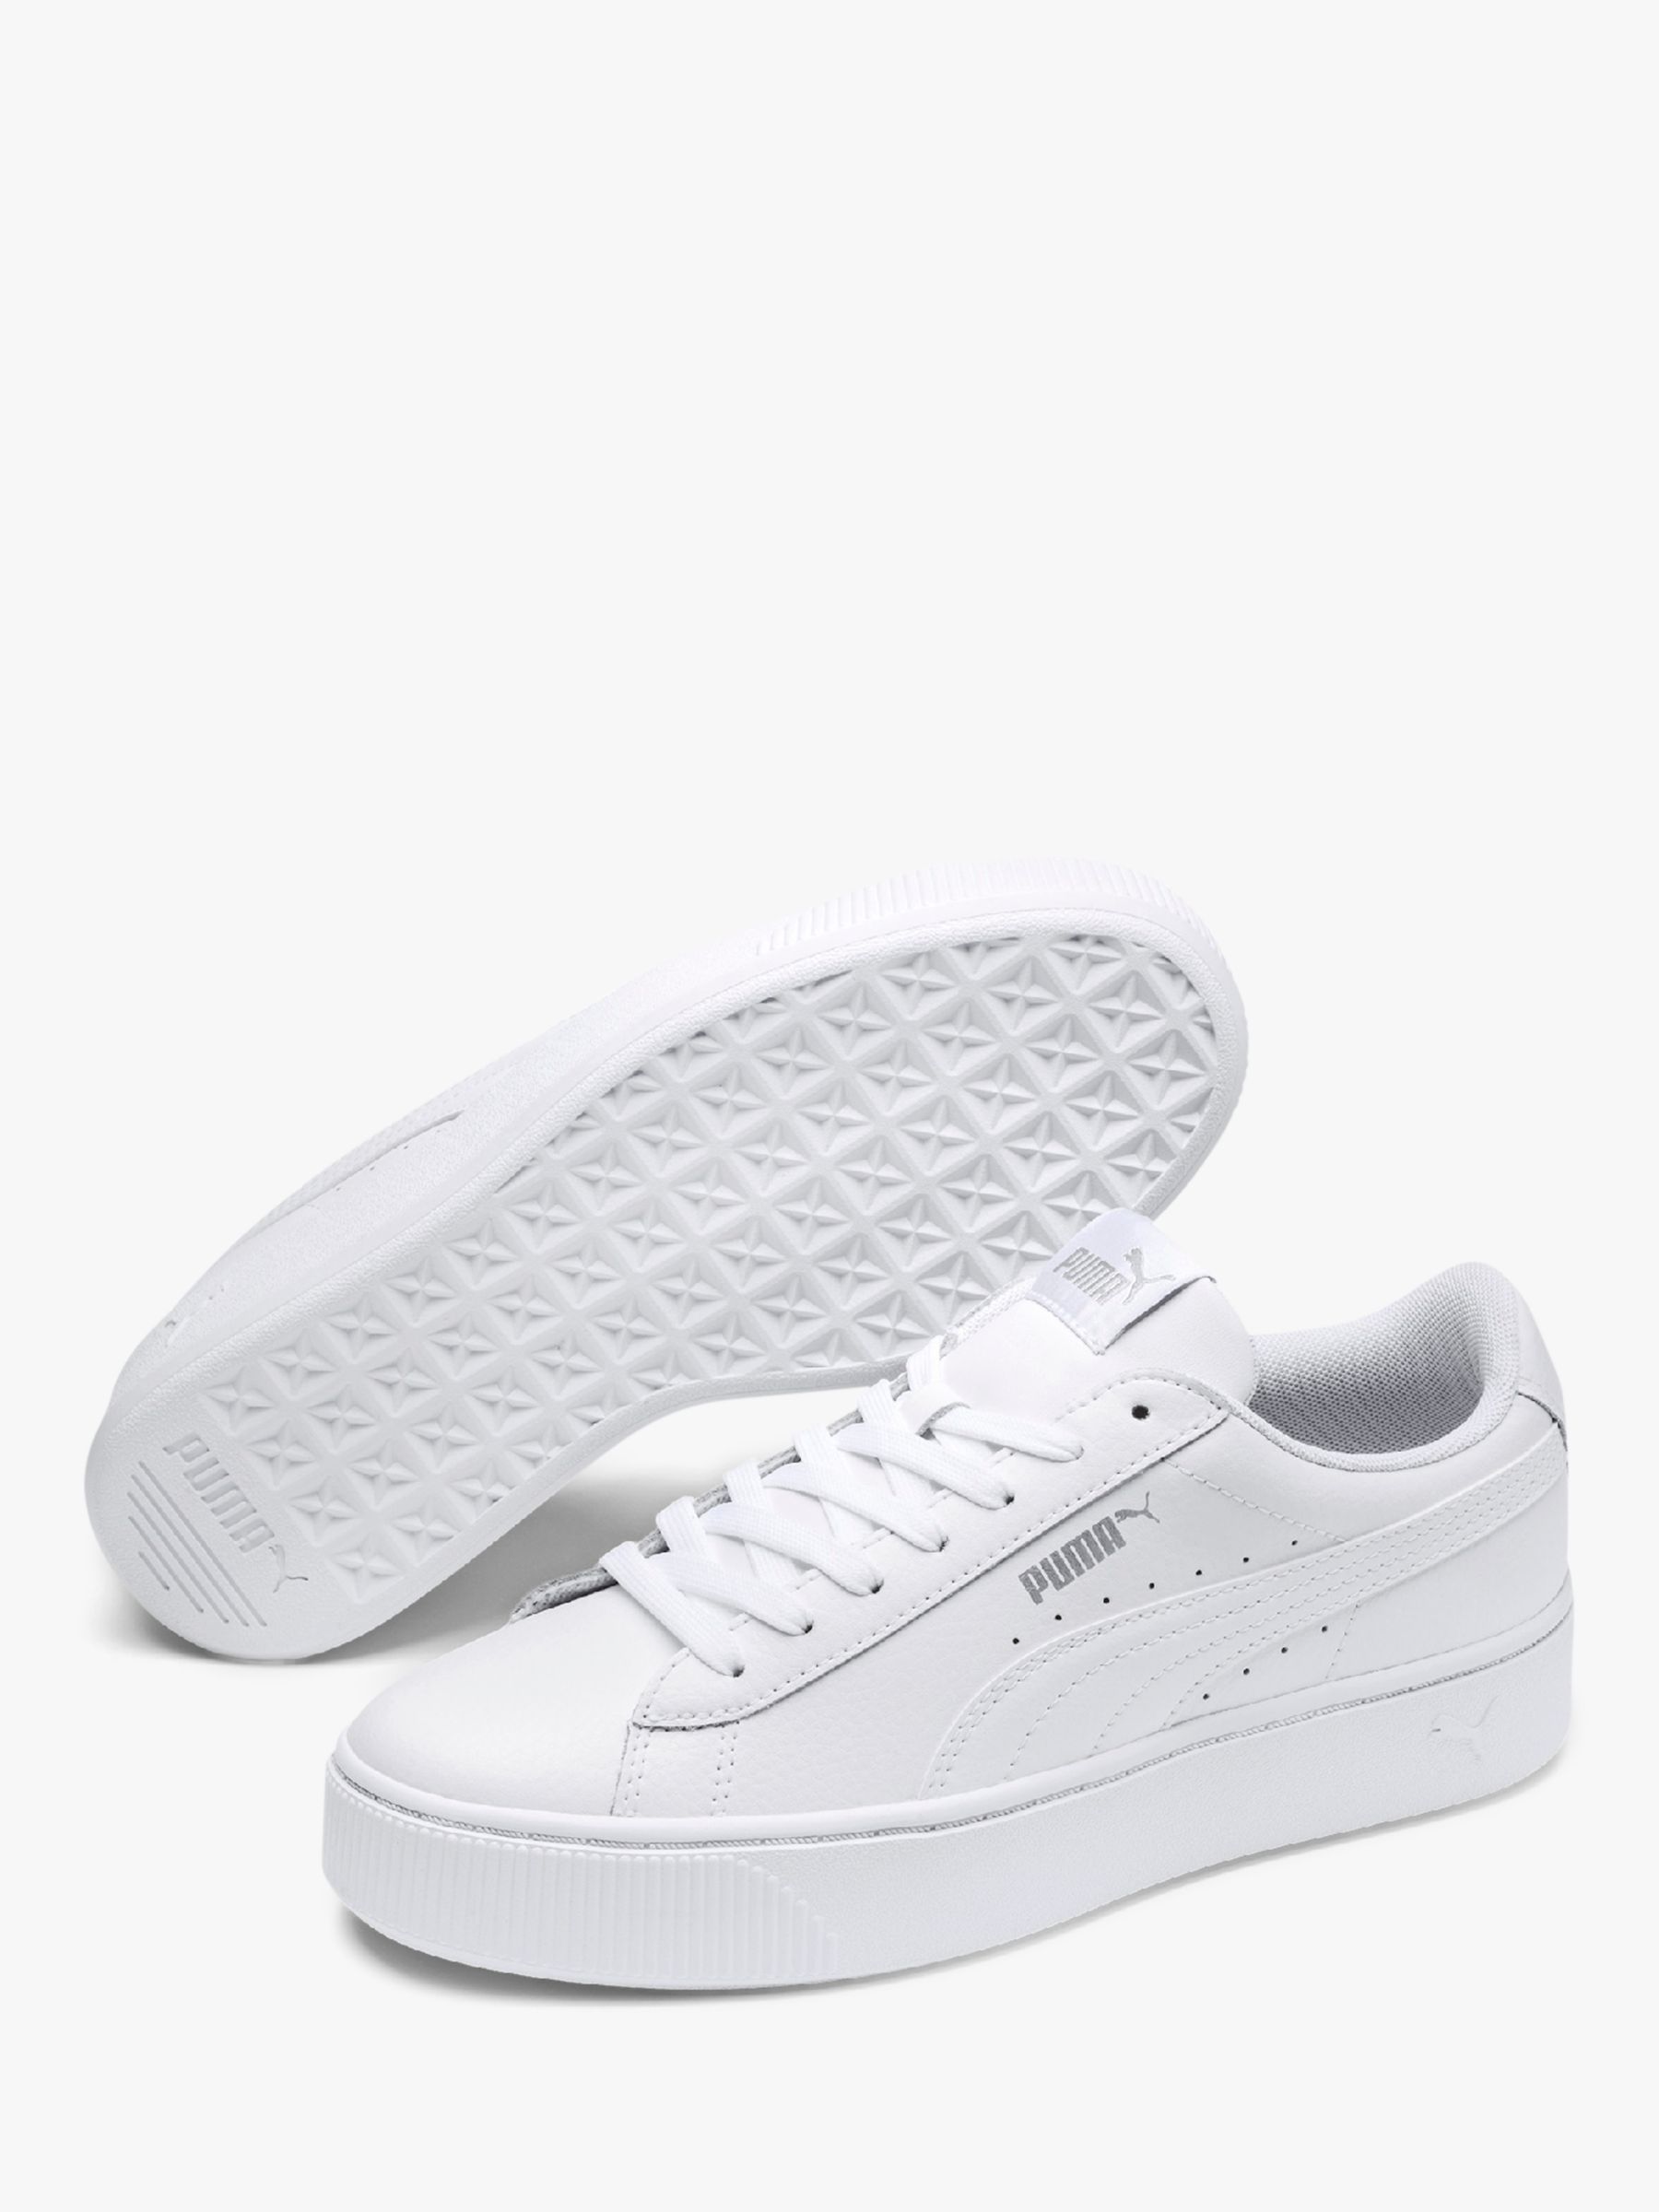 PUMA Vikky Stacked Women's Trainers, White at John Lewis & Partners